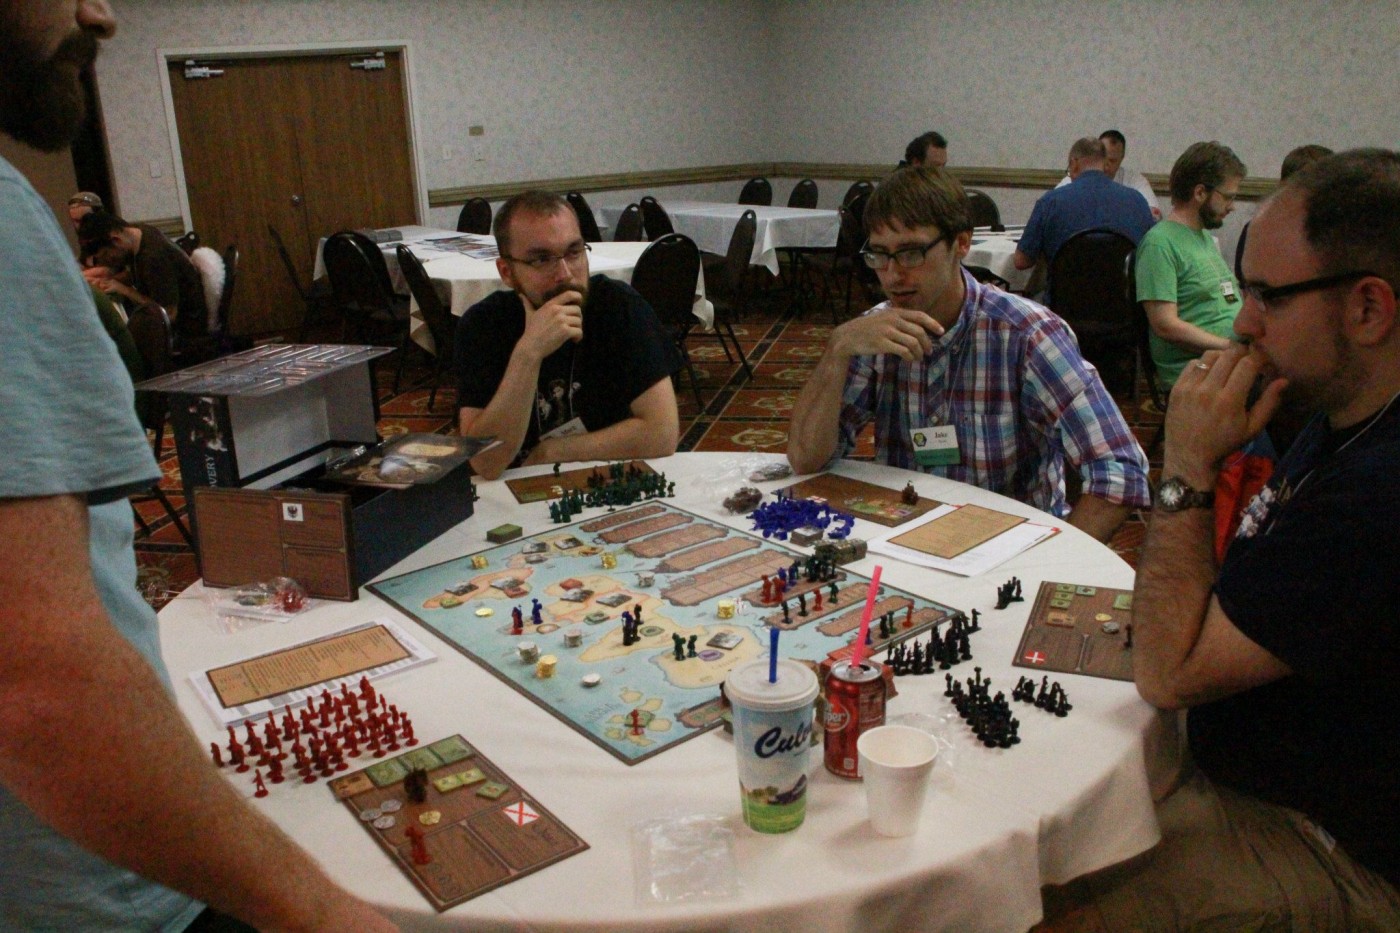 At the 2015 St. George Board Game Convention, St. George, Utah, Circa August 2015 | Photo courtesy of the St. George Board Game Convention, St. George News 